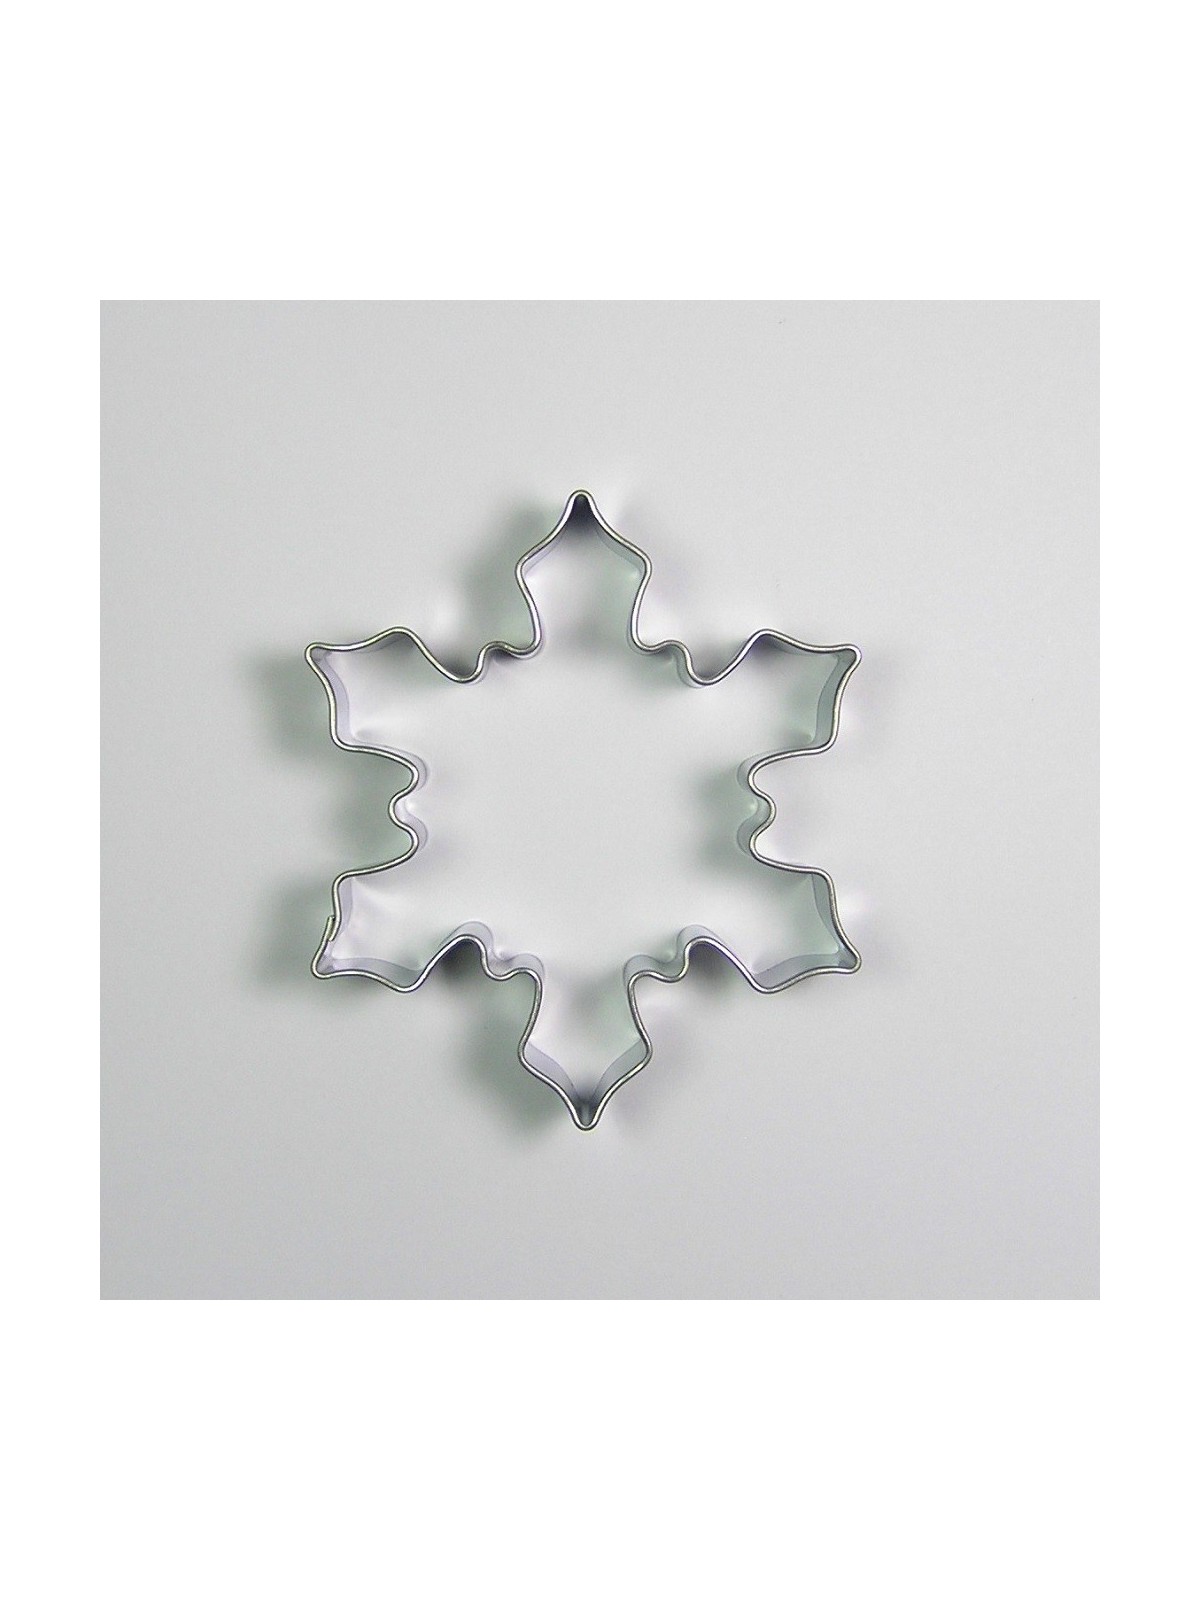 Stainless steel cookie cutter - large flake